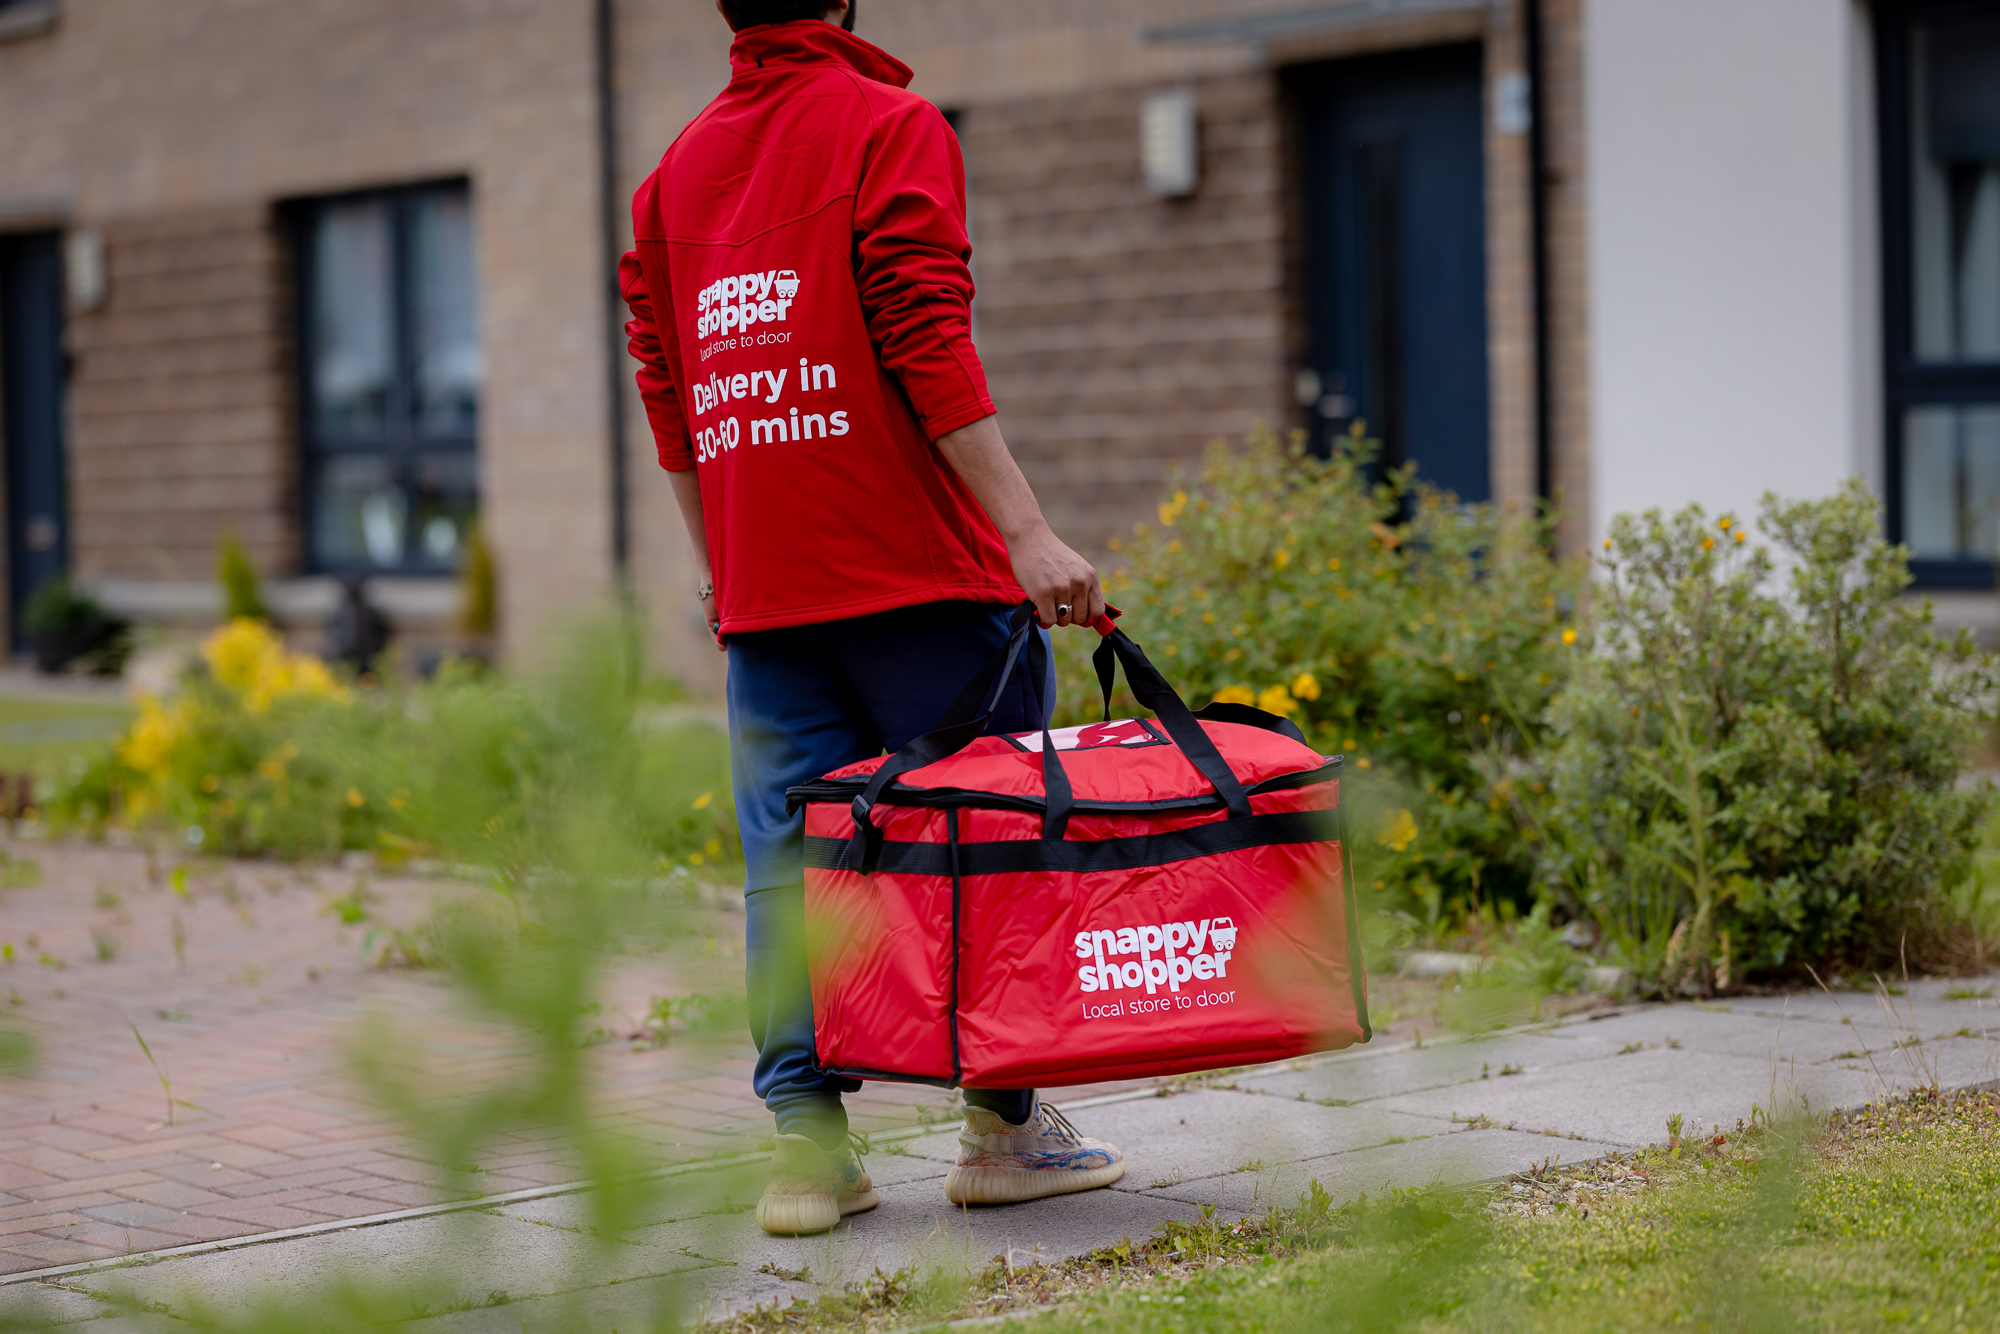 Snappy Shopper raises seven-figure investment to fund growth